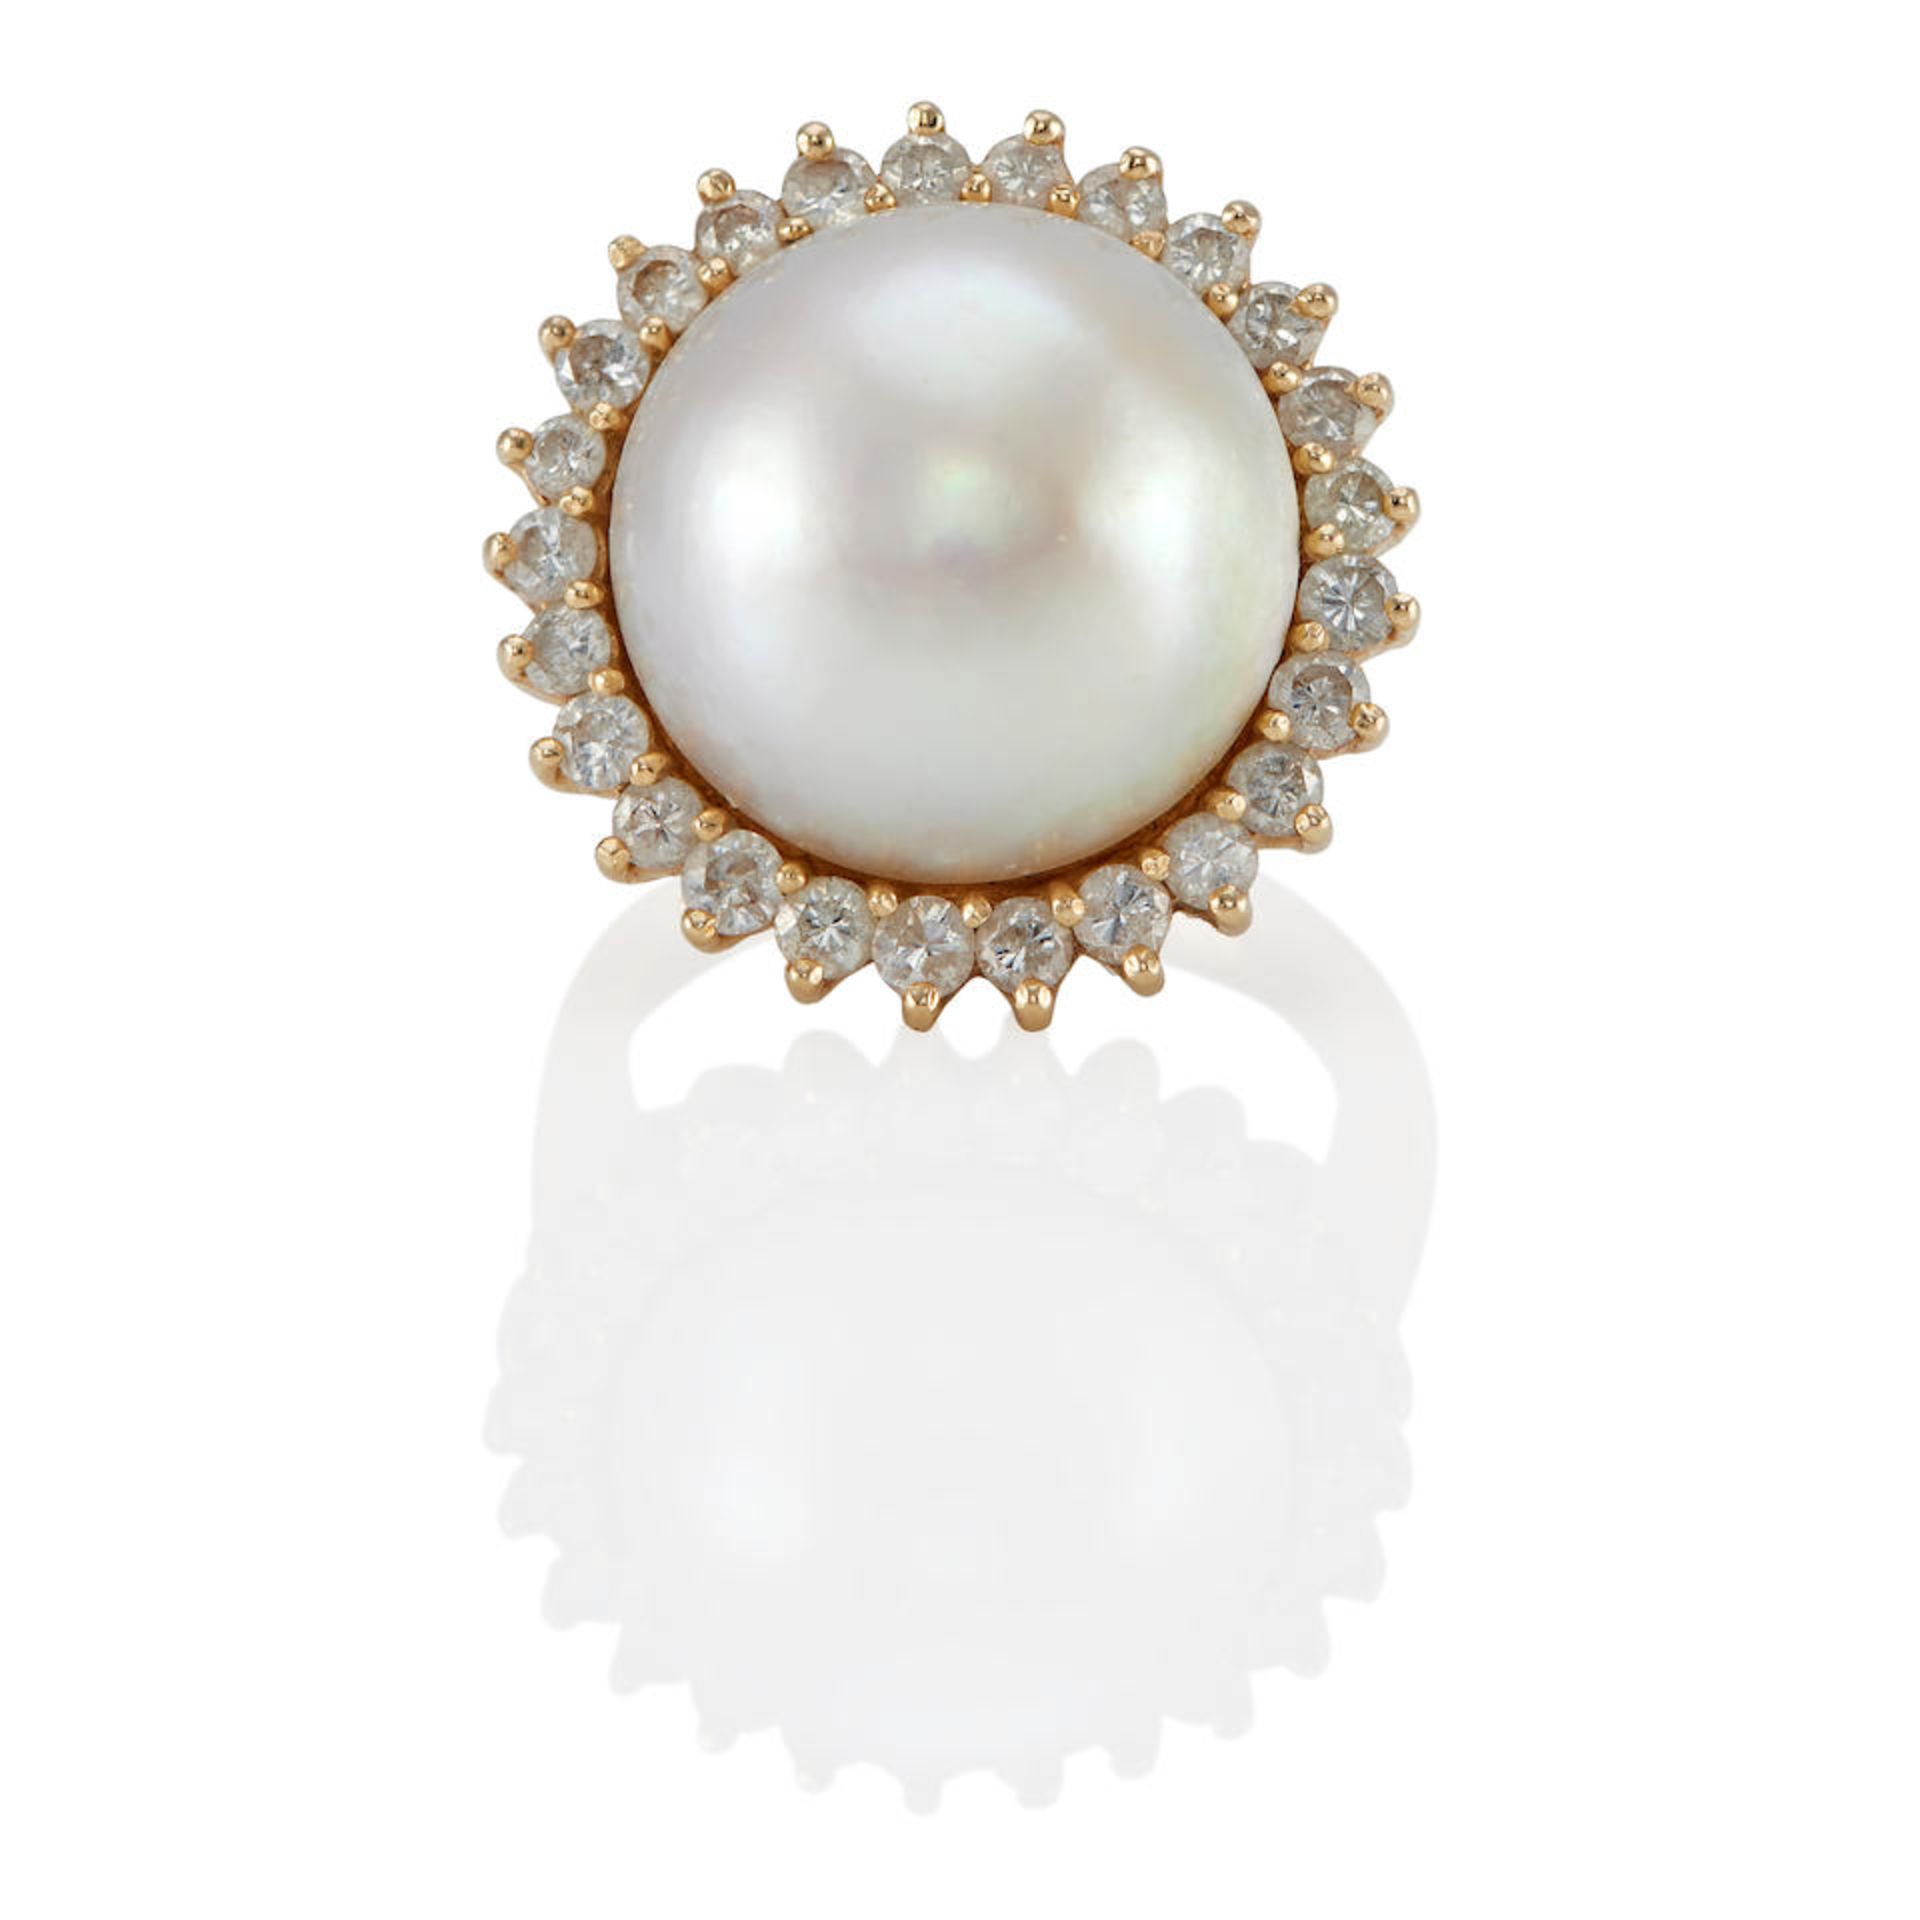 A 14K GOLD, MABÉ PEARL AND DIAMOND RING